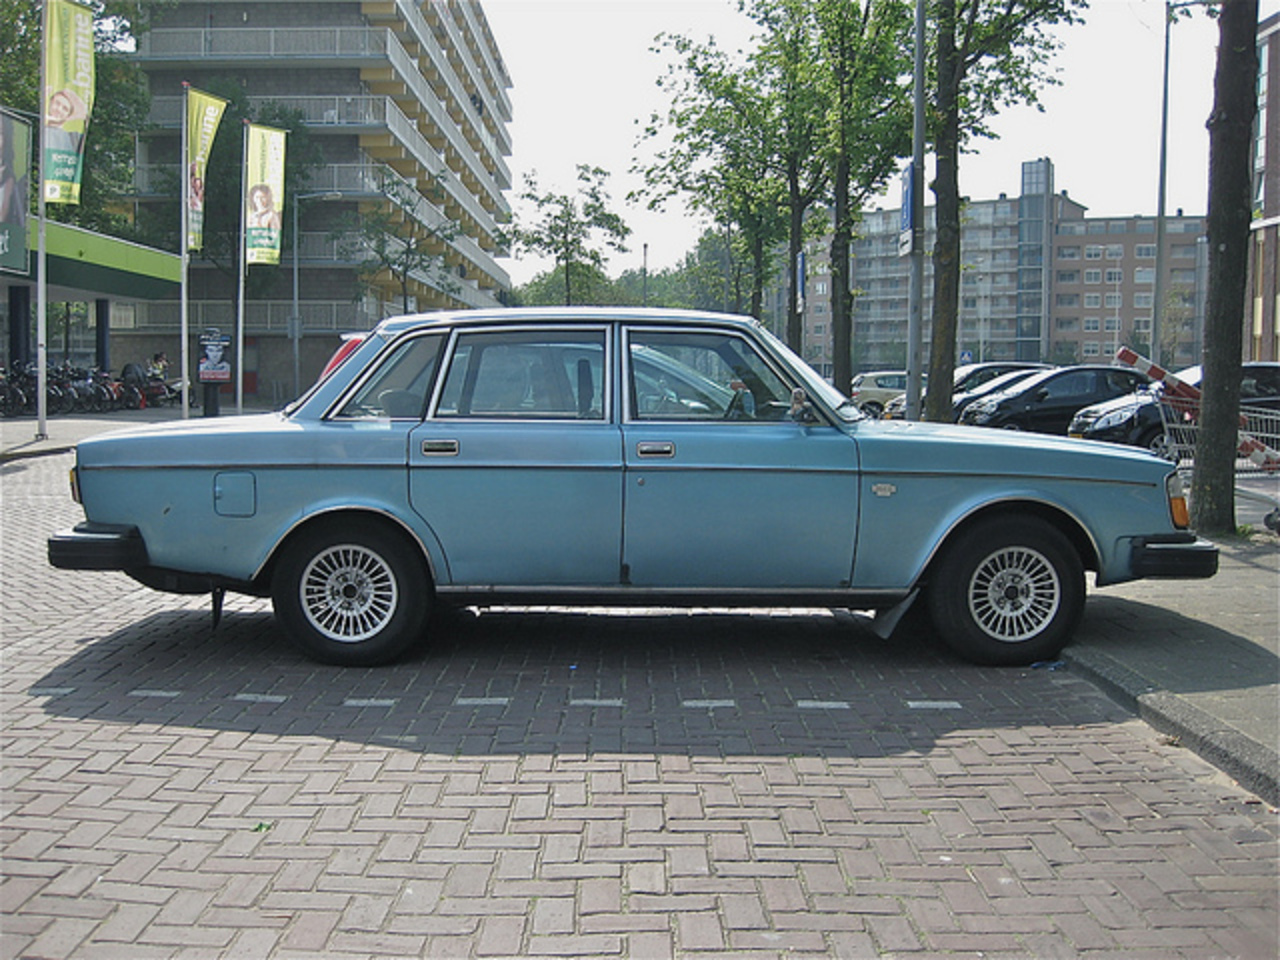 VOLVO 264 GL Automatic, 1976 | Flickr - Photo Sharing!